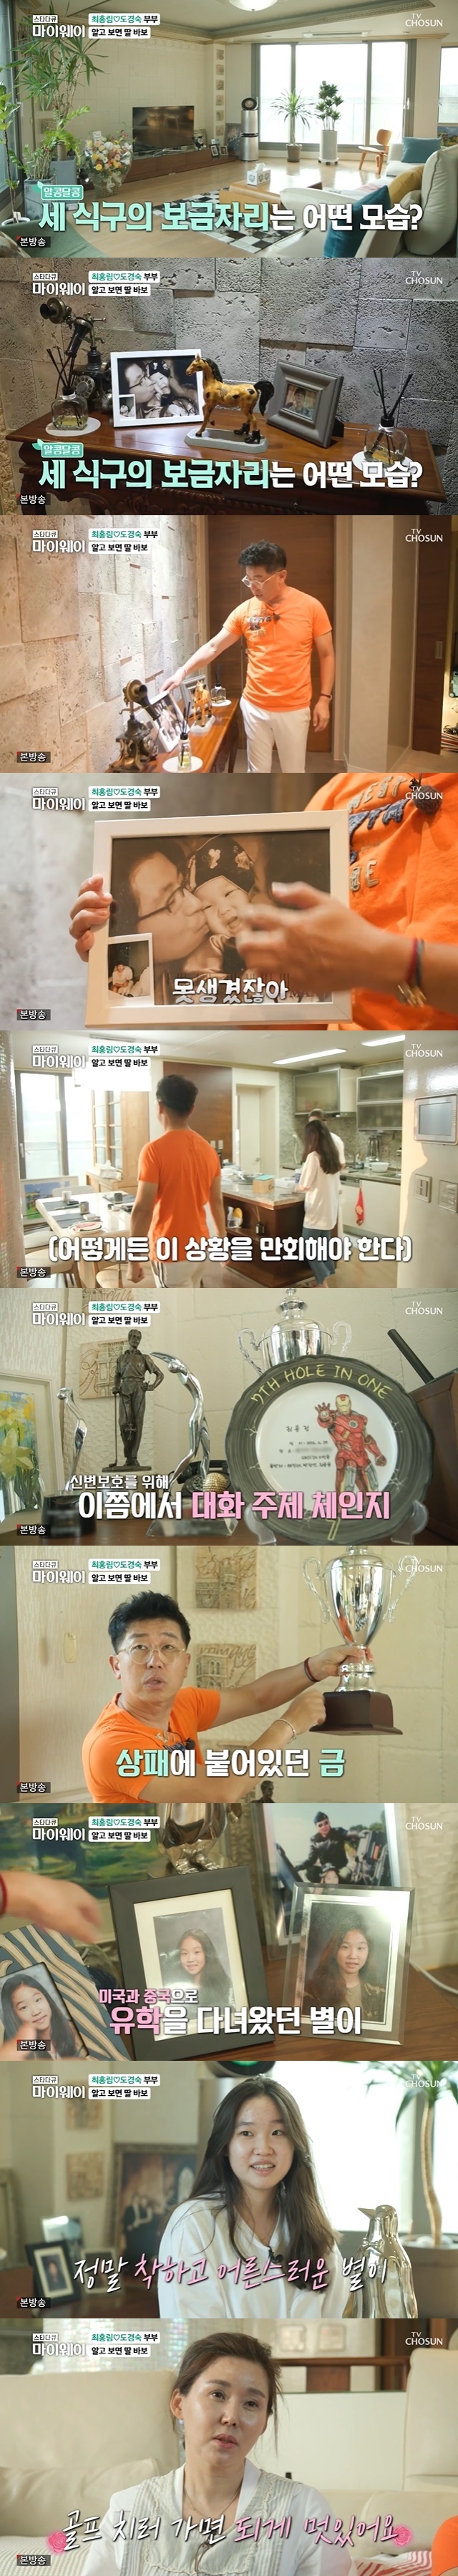 Choi Hong-rim has unveiled his wife, who is a trophy-filled house, daughter of beautiful lookers and a marriage with the introduction of Lim Ha-Ryong in the past.In the 256th TV drama star documentary myway broadcast on July 25, comedian Choi Hong-rim appeared and conveyed his life and meaningful relationship at the age of 57.On this day, Choi Hong-rim revealed the three families homeland, and also greeted the wife and daughter of the extraordinary beautiful look.Choi Hong-rim boasted a picture of his wife and daughter full of house and place. My wife seems to be more beautiful before meeting me than when I met her.Choi Hong-rim, who praised her daughter for her hardships and changed a lot, said that she was honestly ugly about her daughters photos.Choi Hong-rim also showed trophies throughout the house: Choi Hong-rim, the first comedian to play professional golfer, was a plaque winner who participated in the competition.Choi Hong-rim lifted one of them and laughed, saying, I sold it when the gold price was in full swing by tearing the plaque gold.On this day, Choi Hong-rim met with his family, Lim Ha-Ryong, a close comedian.In fact, I met my wife, Do Kyung-sook, with the introduction of Lim Ha-Ryong, who said, I just introduced it, not an intermediate, but they brought a wedding invitation later. Choi Hong-rim said, When Lim Ha-Ryong tells me, you should marriage with such a woman.I think I have some money, he joked and laughed.